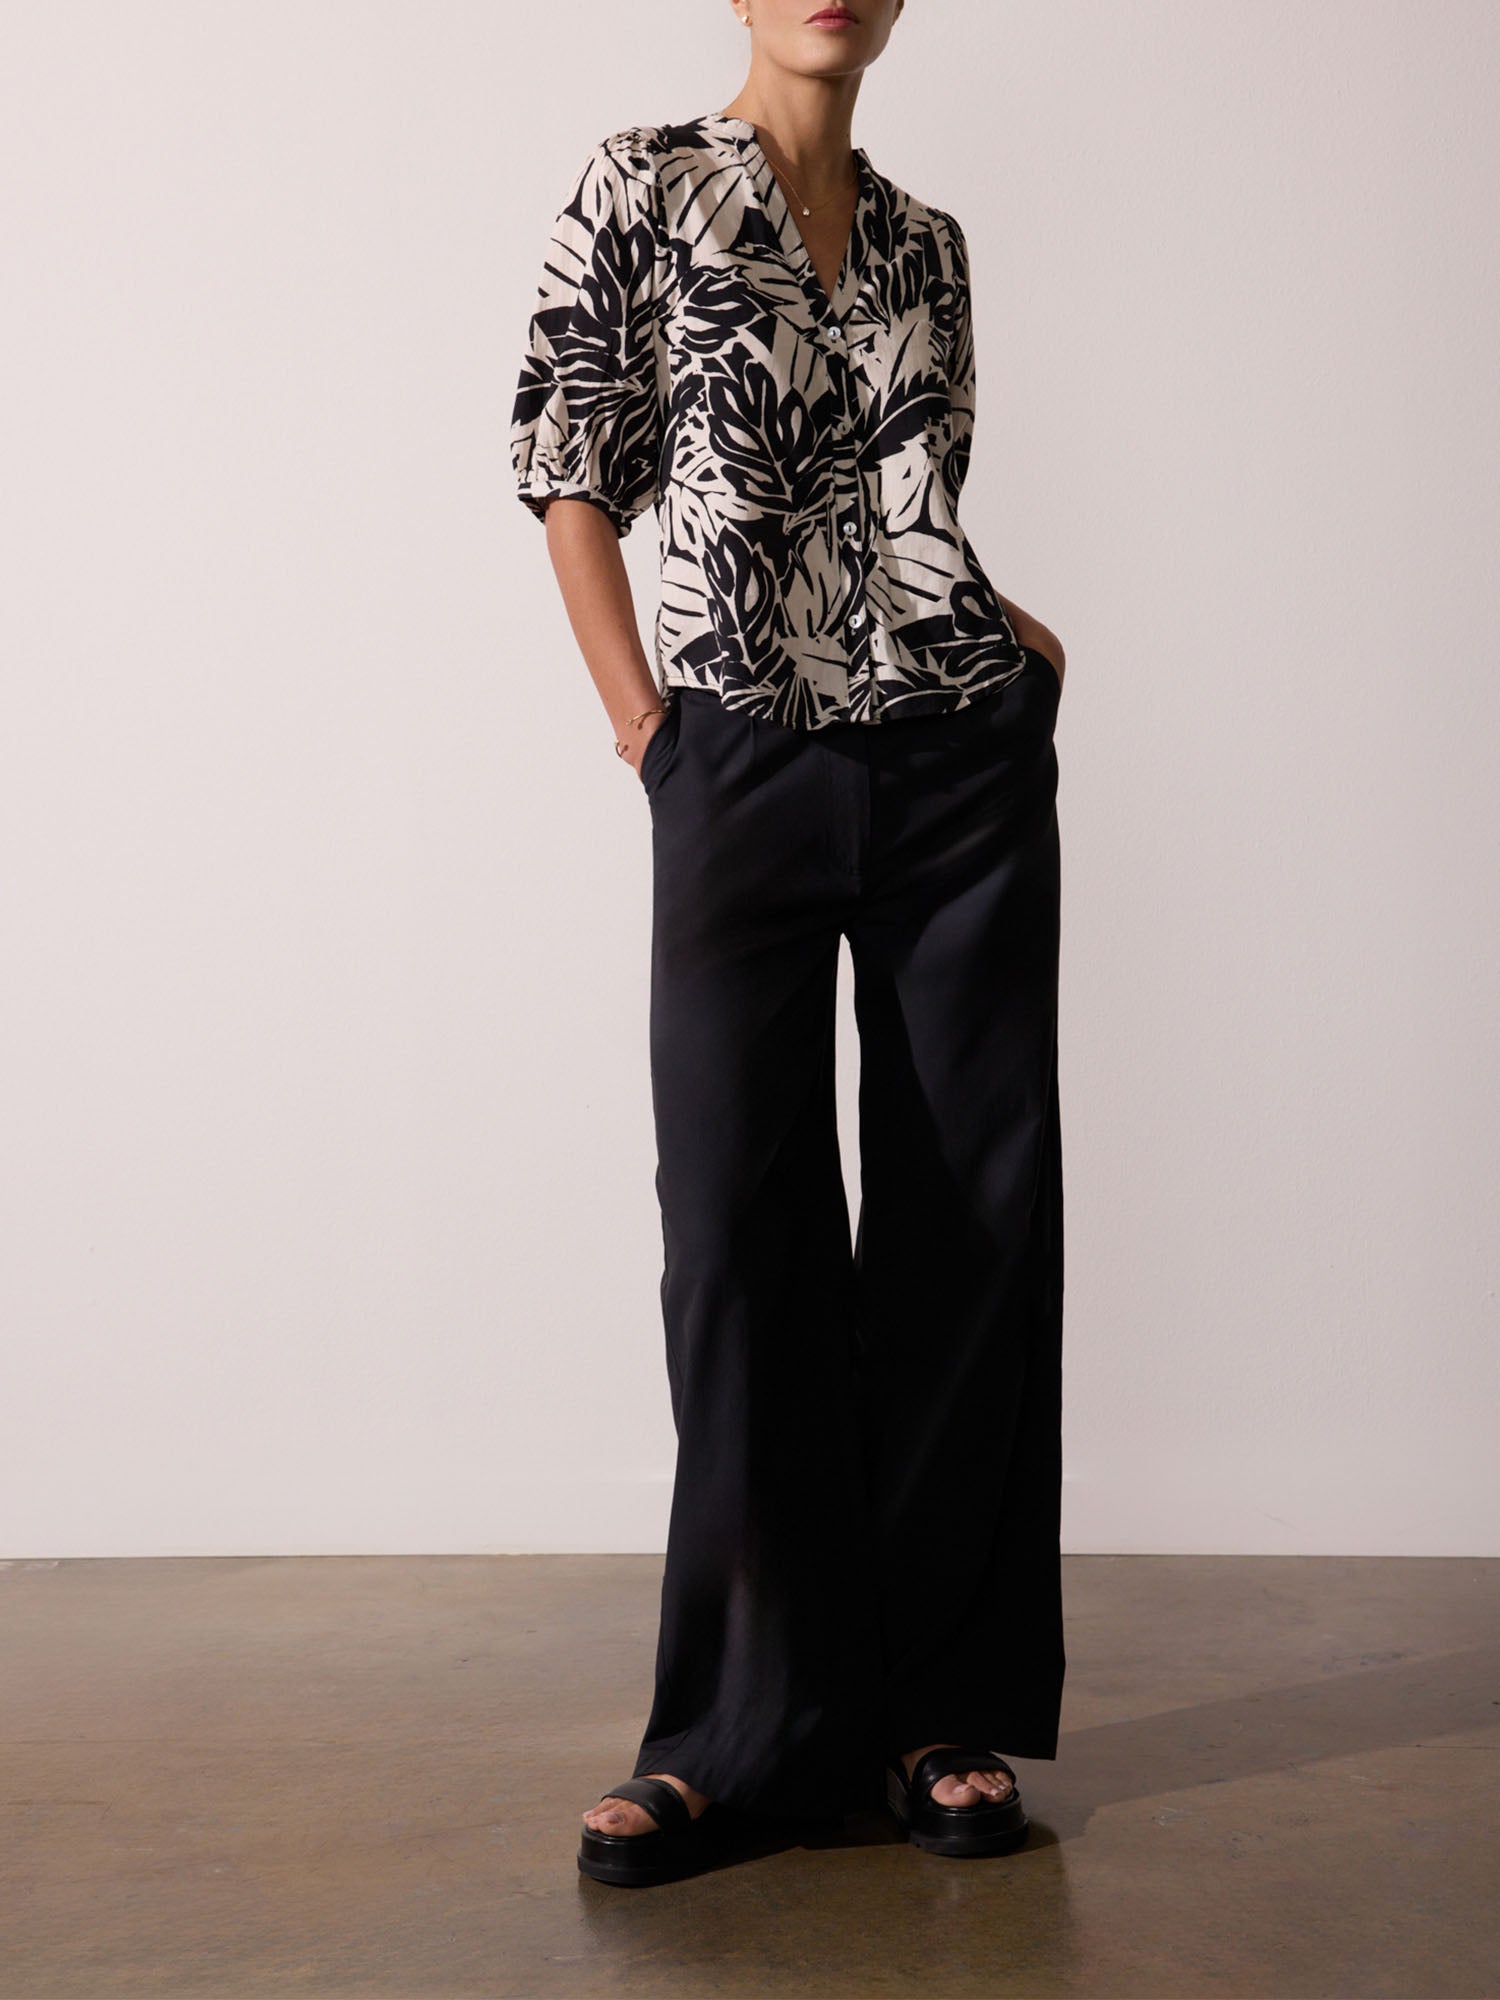 Asteria black and white printed blouse full view